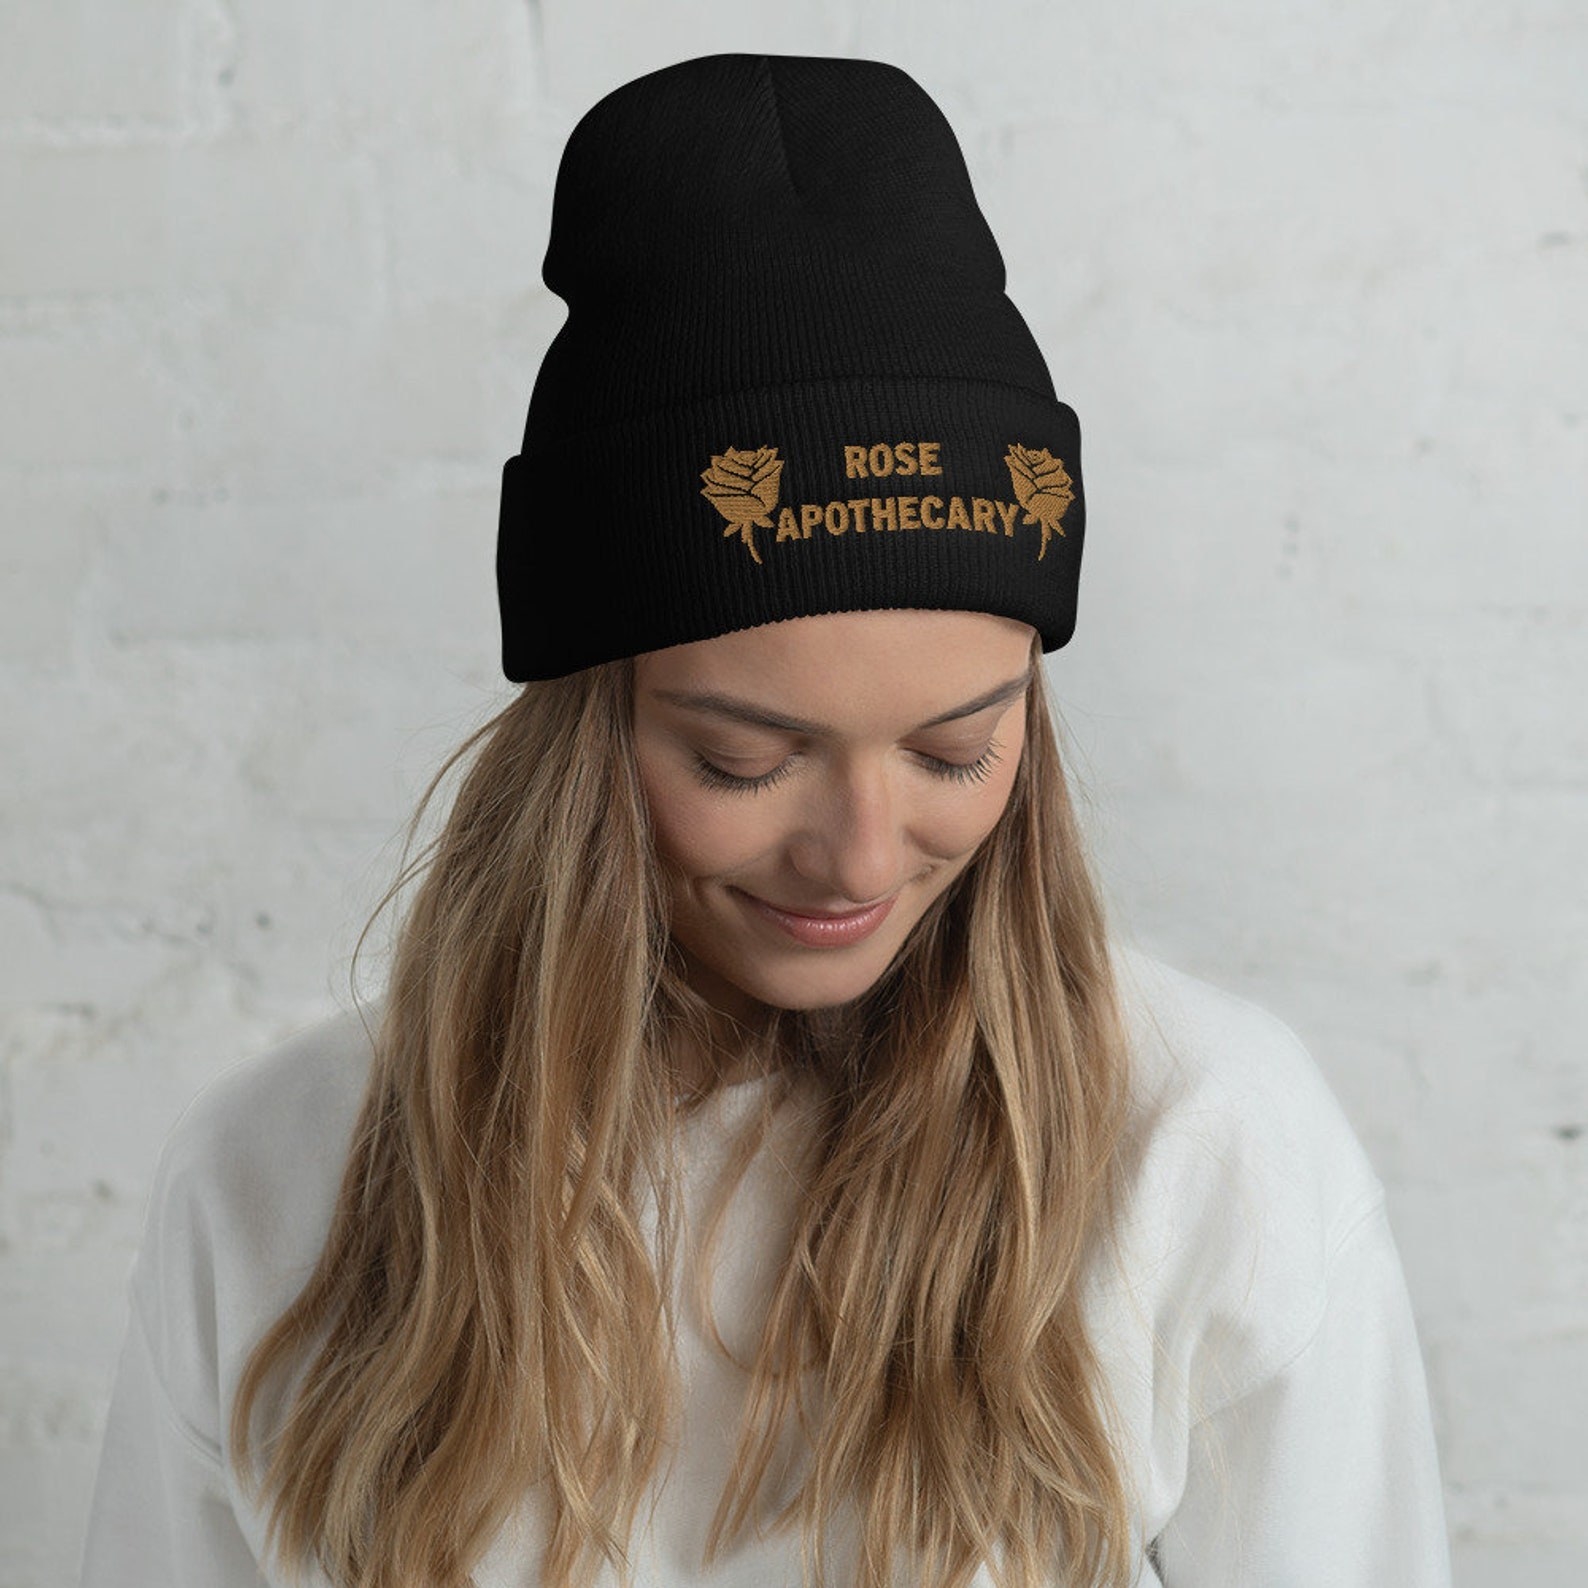 Model wearing the black Rose Apothecary beanie